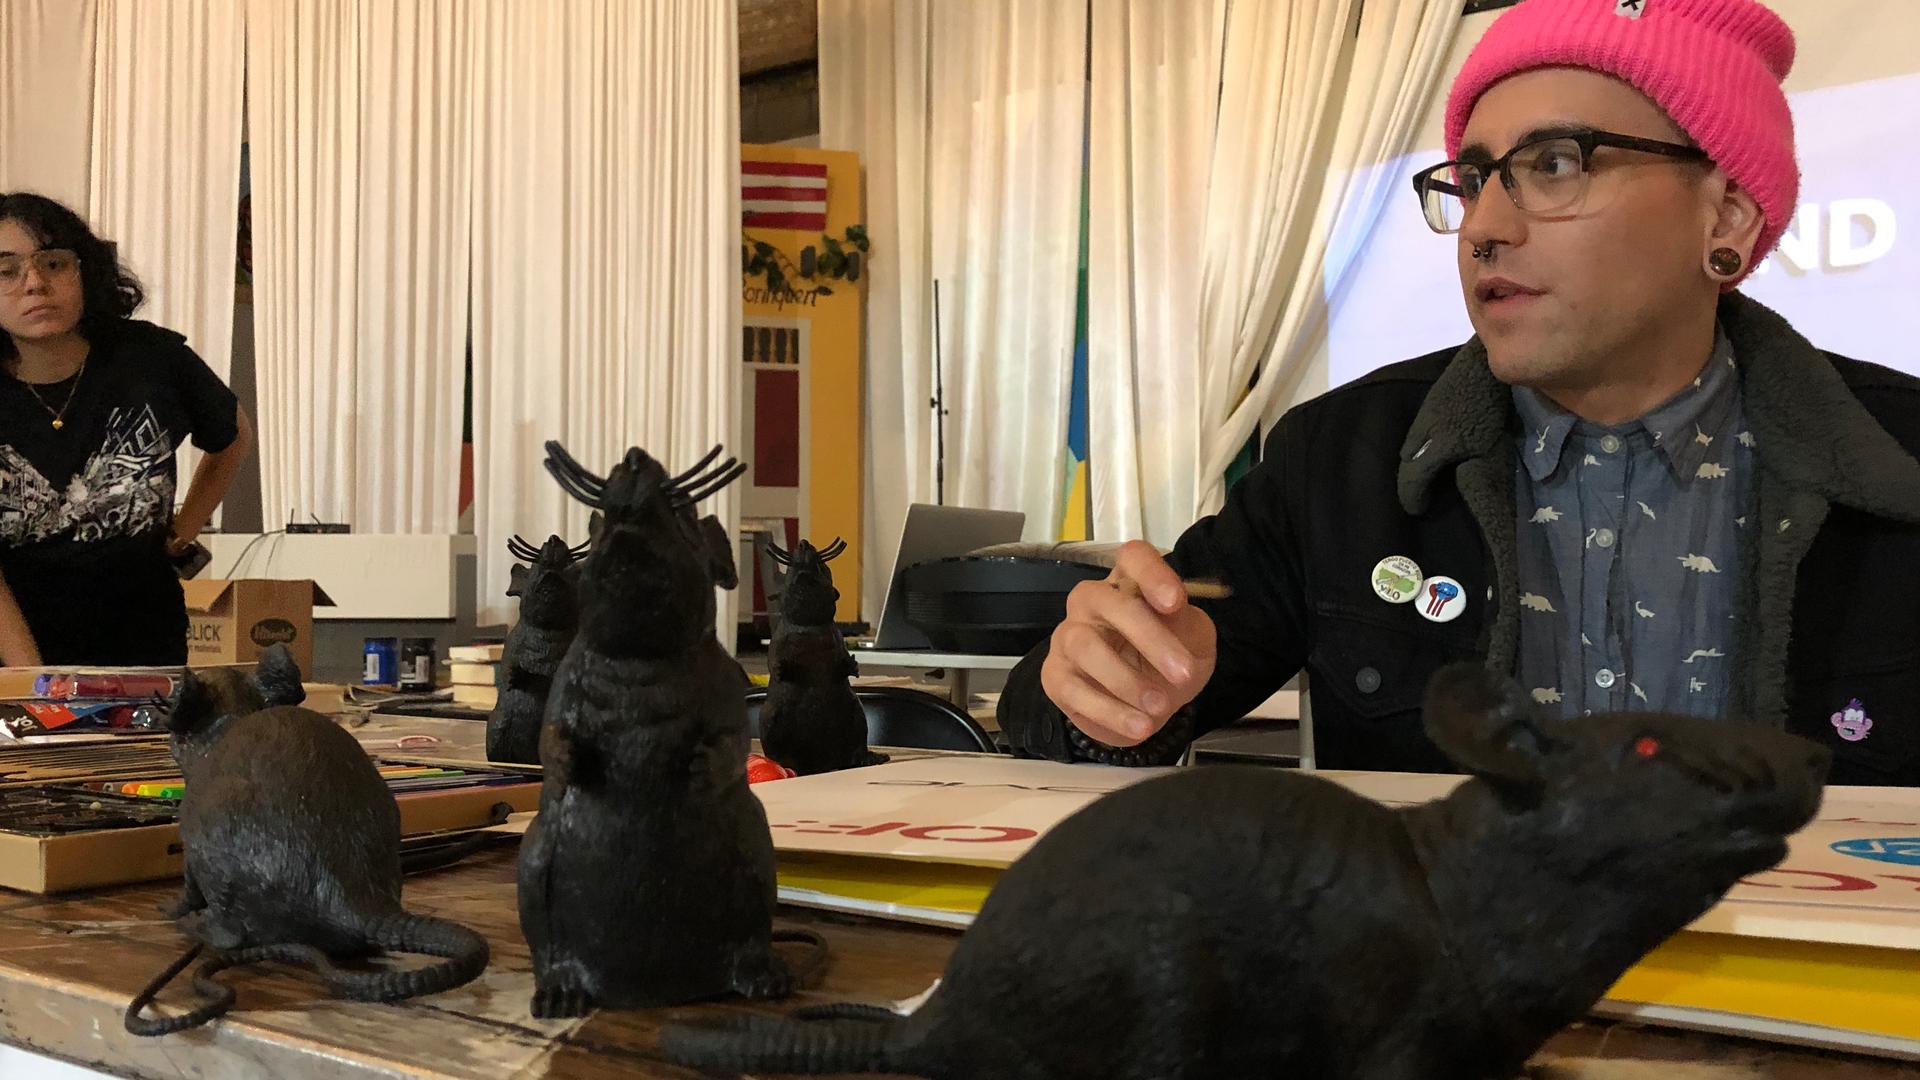 A person wearing a pink cap sits at a table near three large, black, plastic rats.